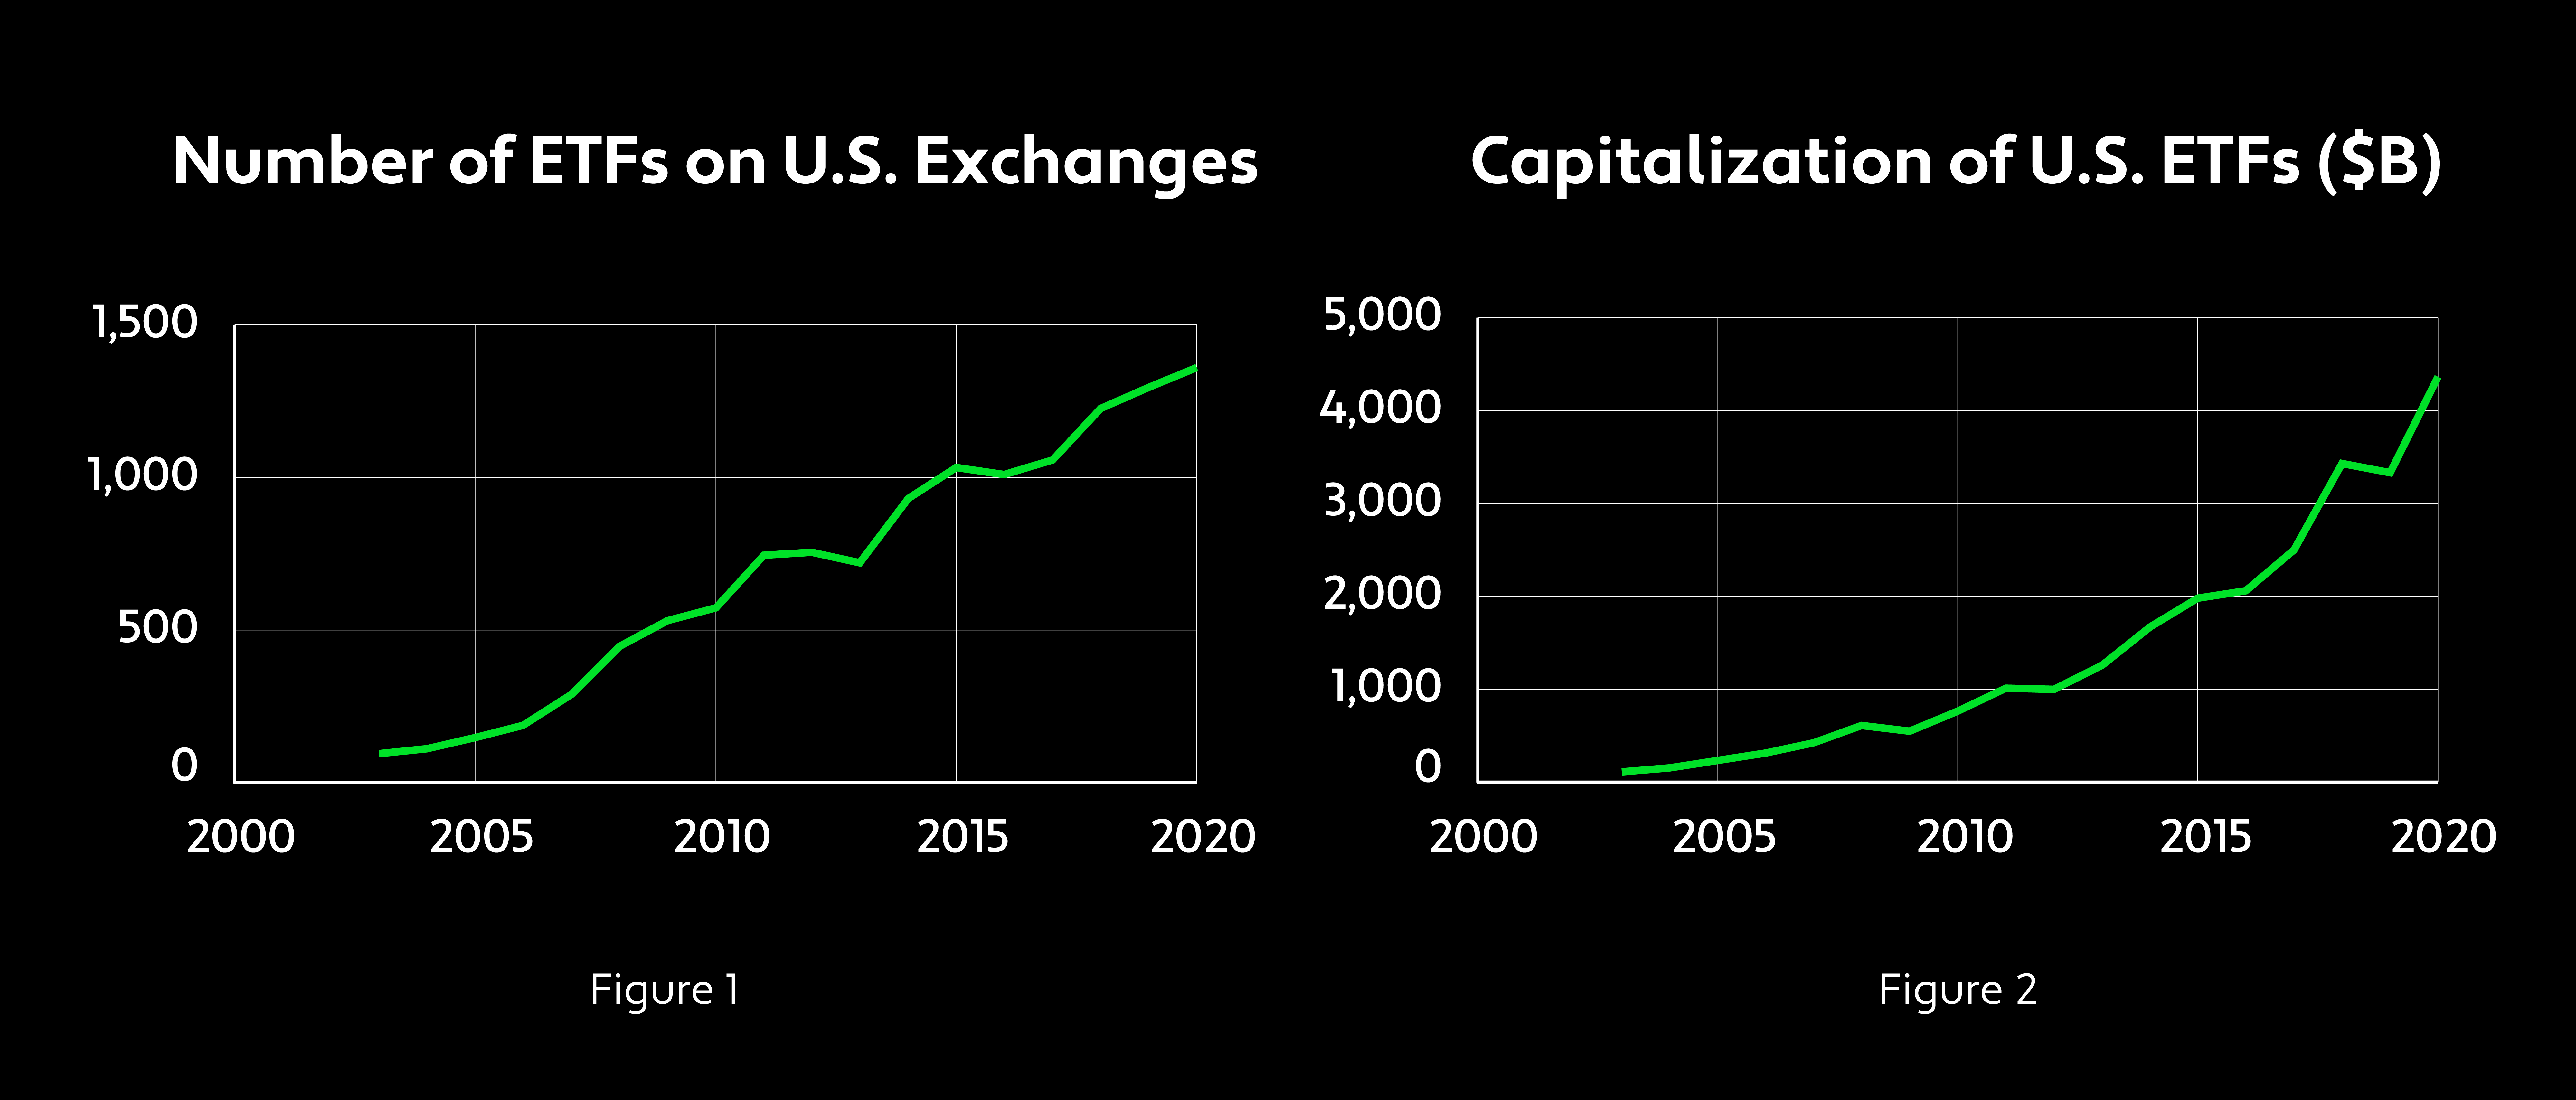 Charts with number and capitalization of ETFs in the U.S.